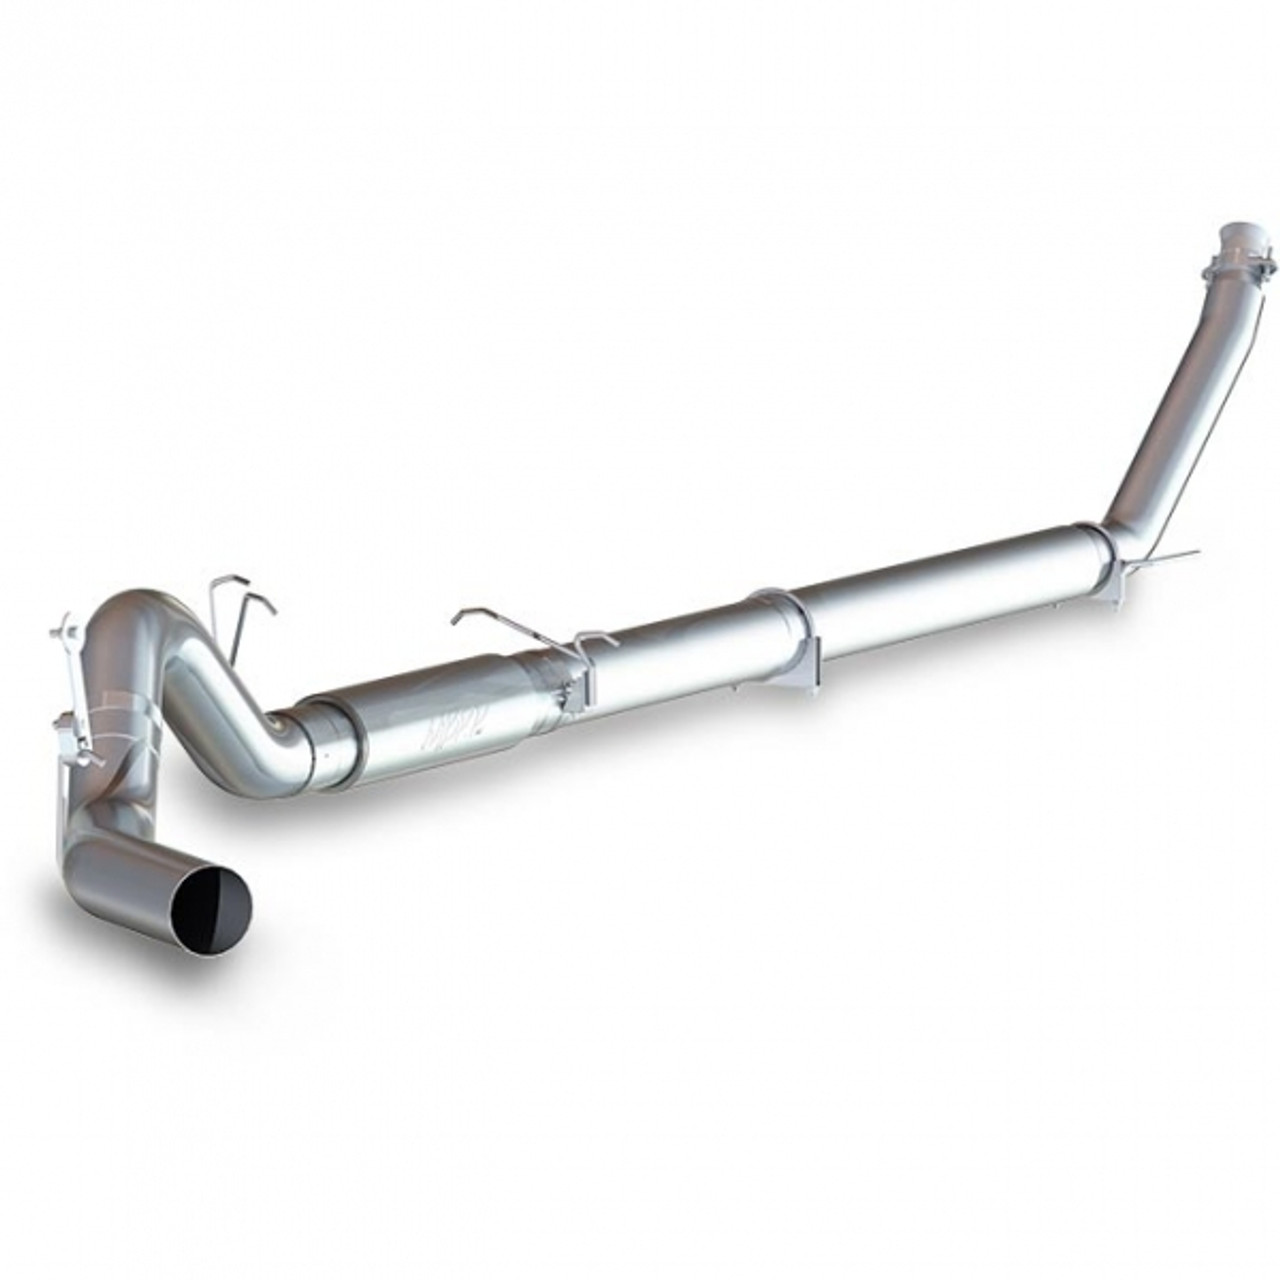 Shop with Blessed Performance for the MBRP 5" Performance Series Turbo-Back Exhaust System MBRP 5" Performance for your 1994-1992 5.9L Cummins. 